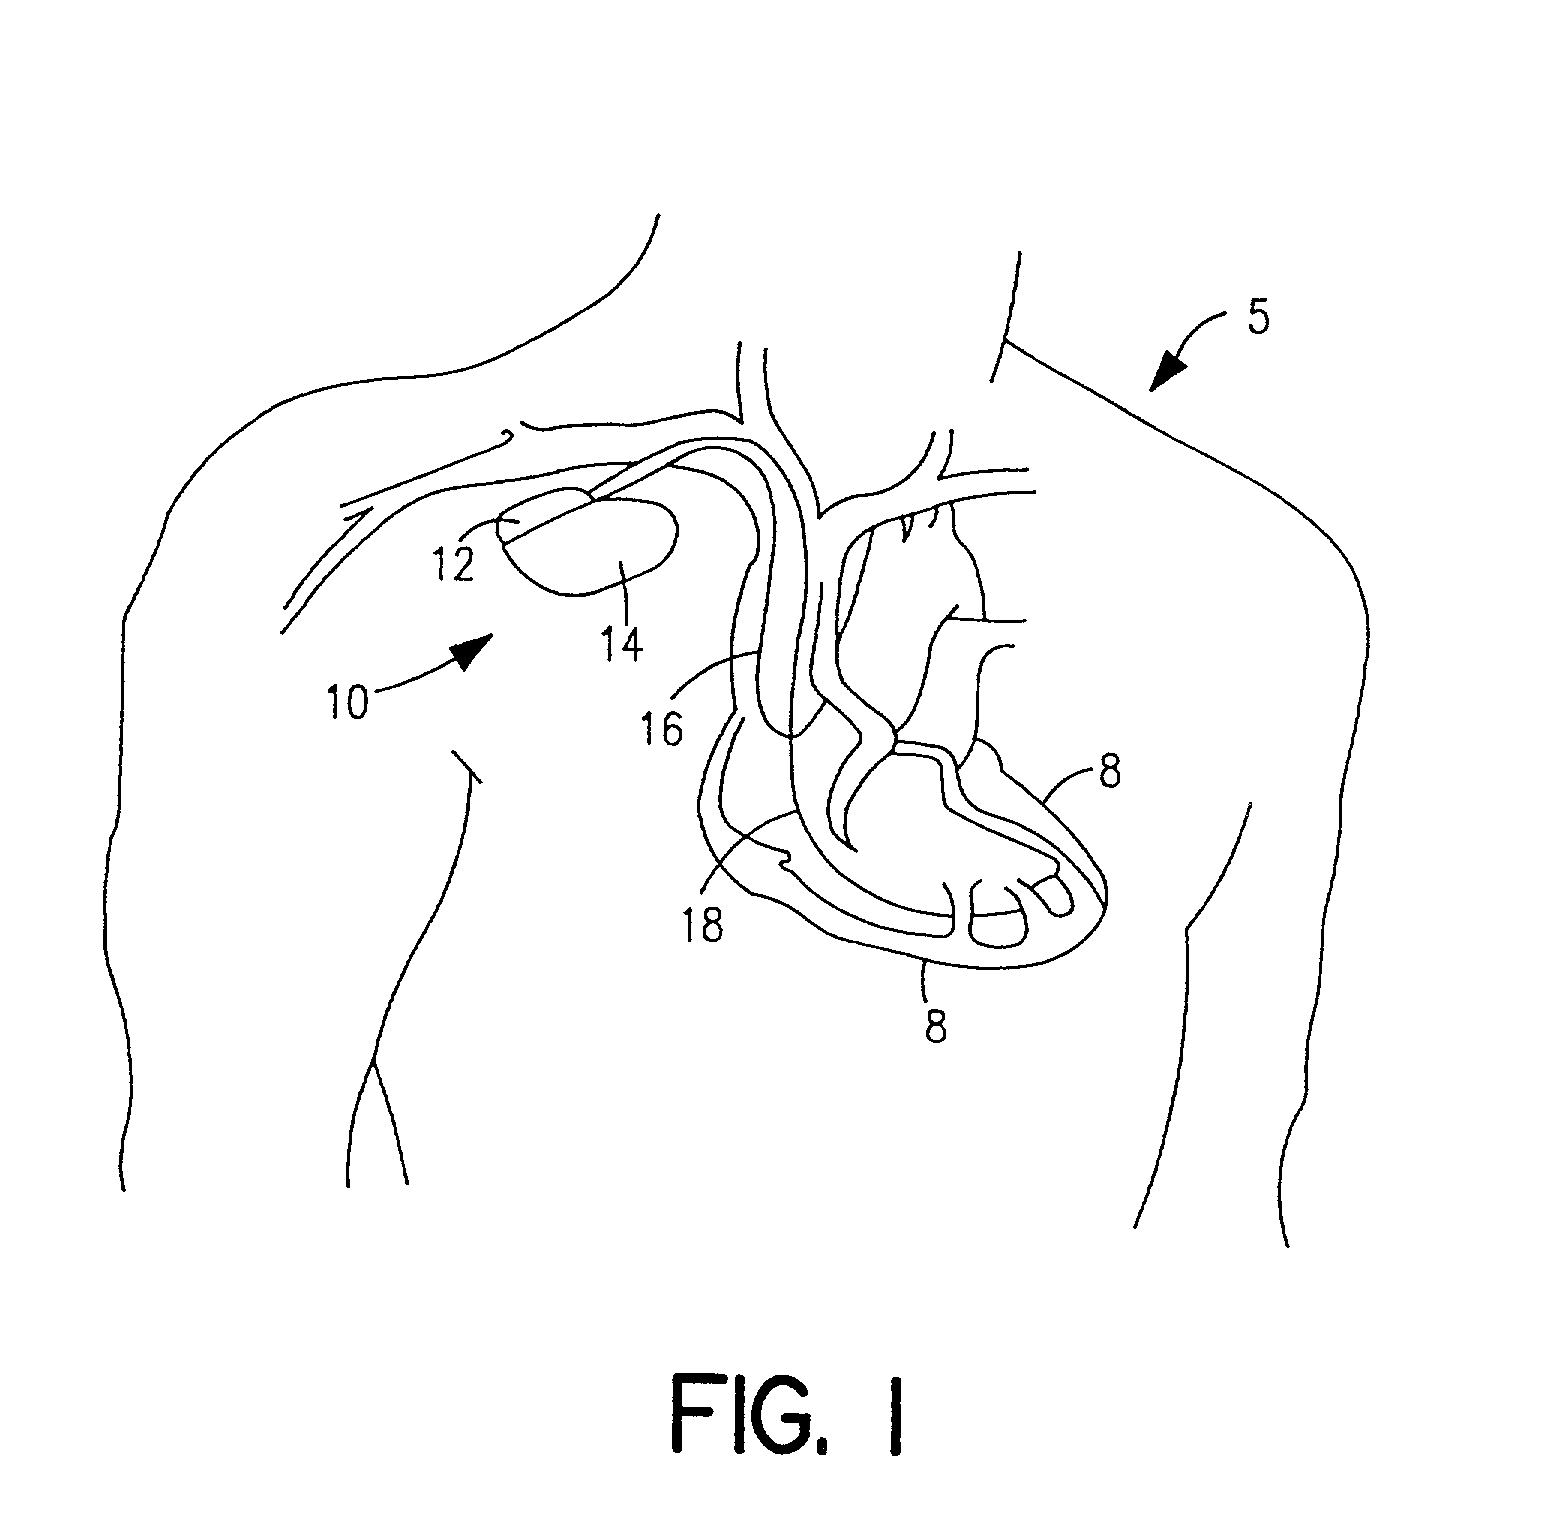 System and method of automated invoicing for communications between an implantable medical device and a remote computer system or health care provider